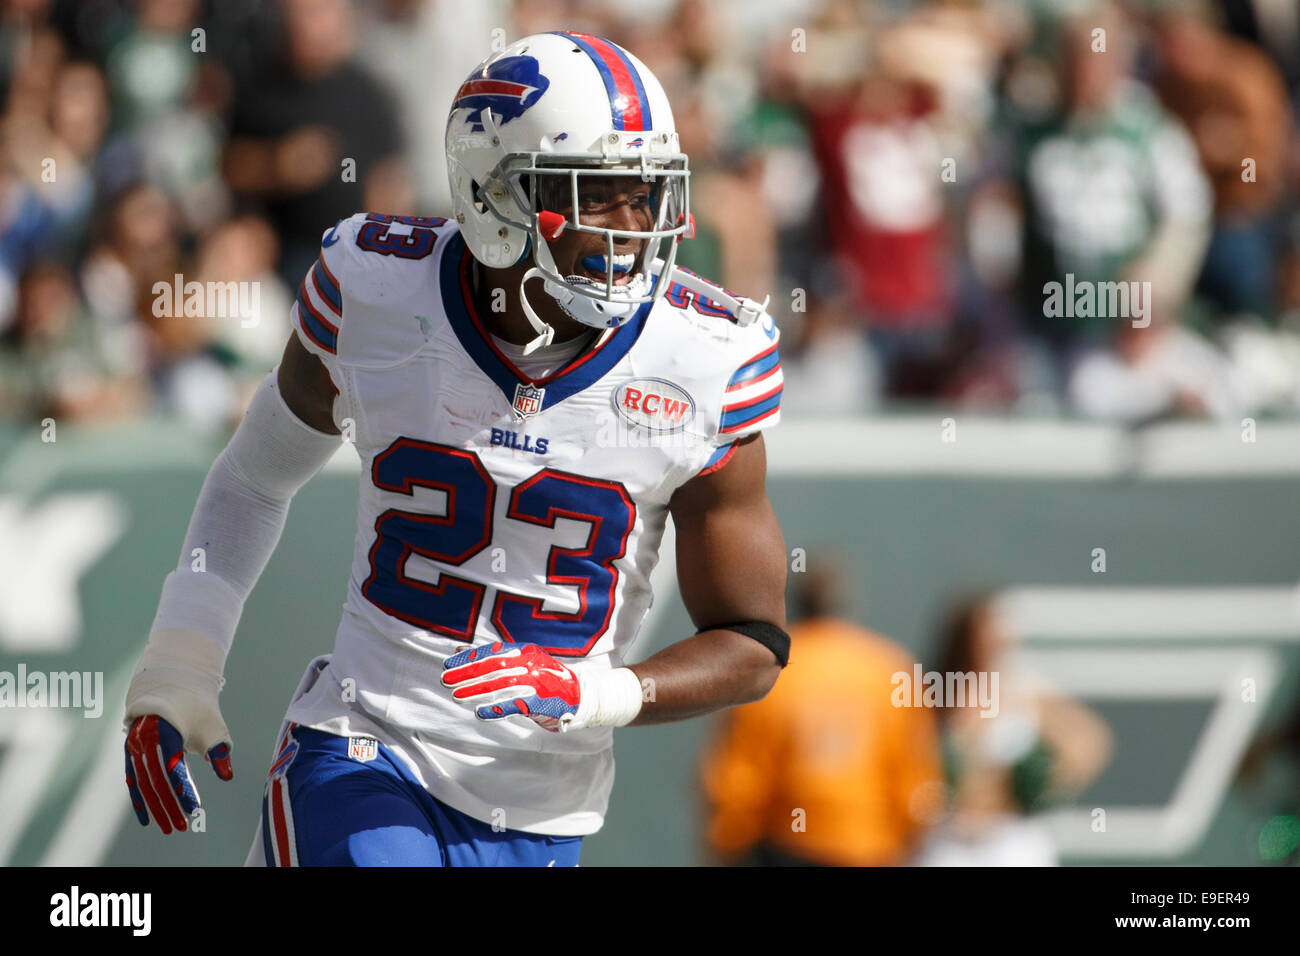 East Rutherford, NJ, USA. 26th October, 2014. Buffalo Bills free safety Aaron Williams (23) in acton during the NFL game between the Buffalo Bills and the New York Jets at MetLife Stadium in East Rutherford, New Jersey. The Bills won 43-23. Credit:  Cal Sport Media/Alamy Live News Stock Photo